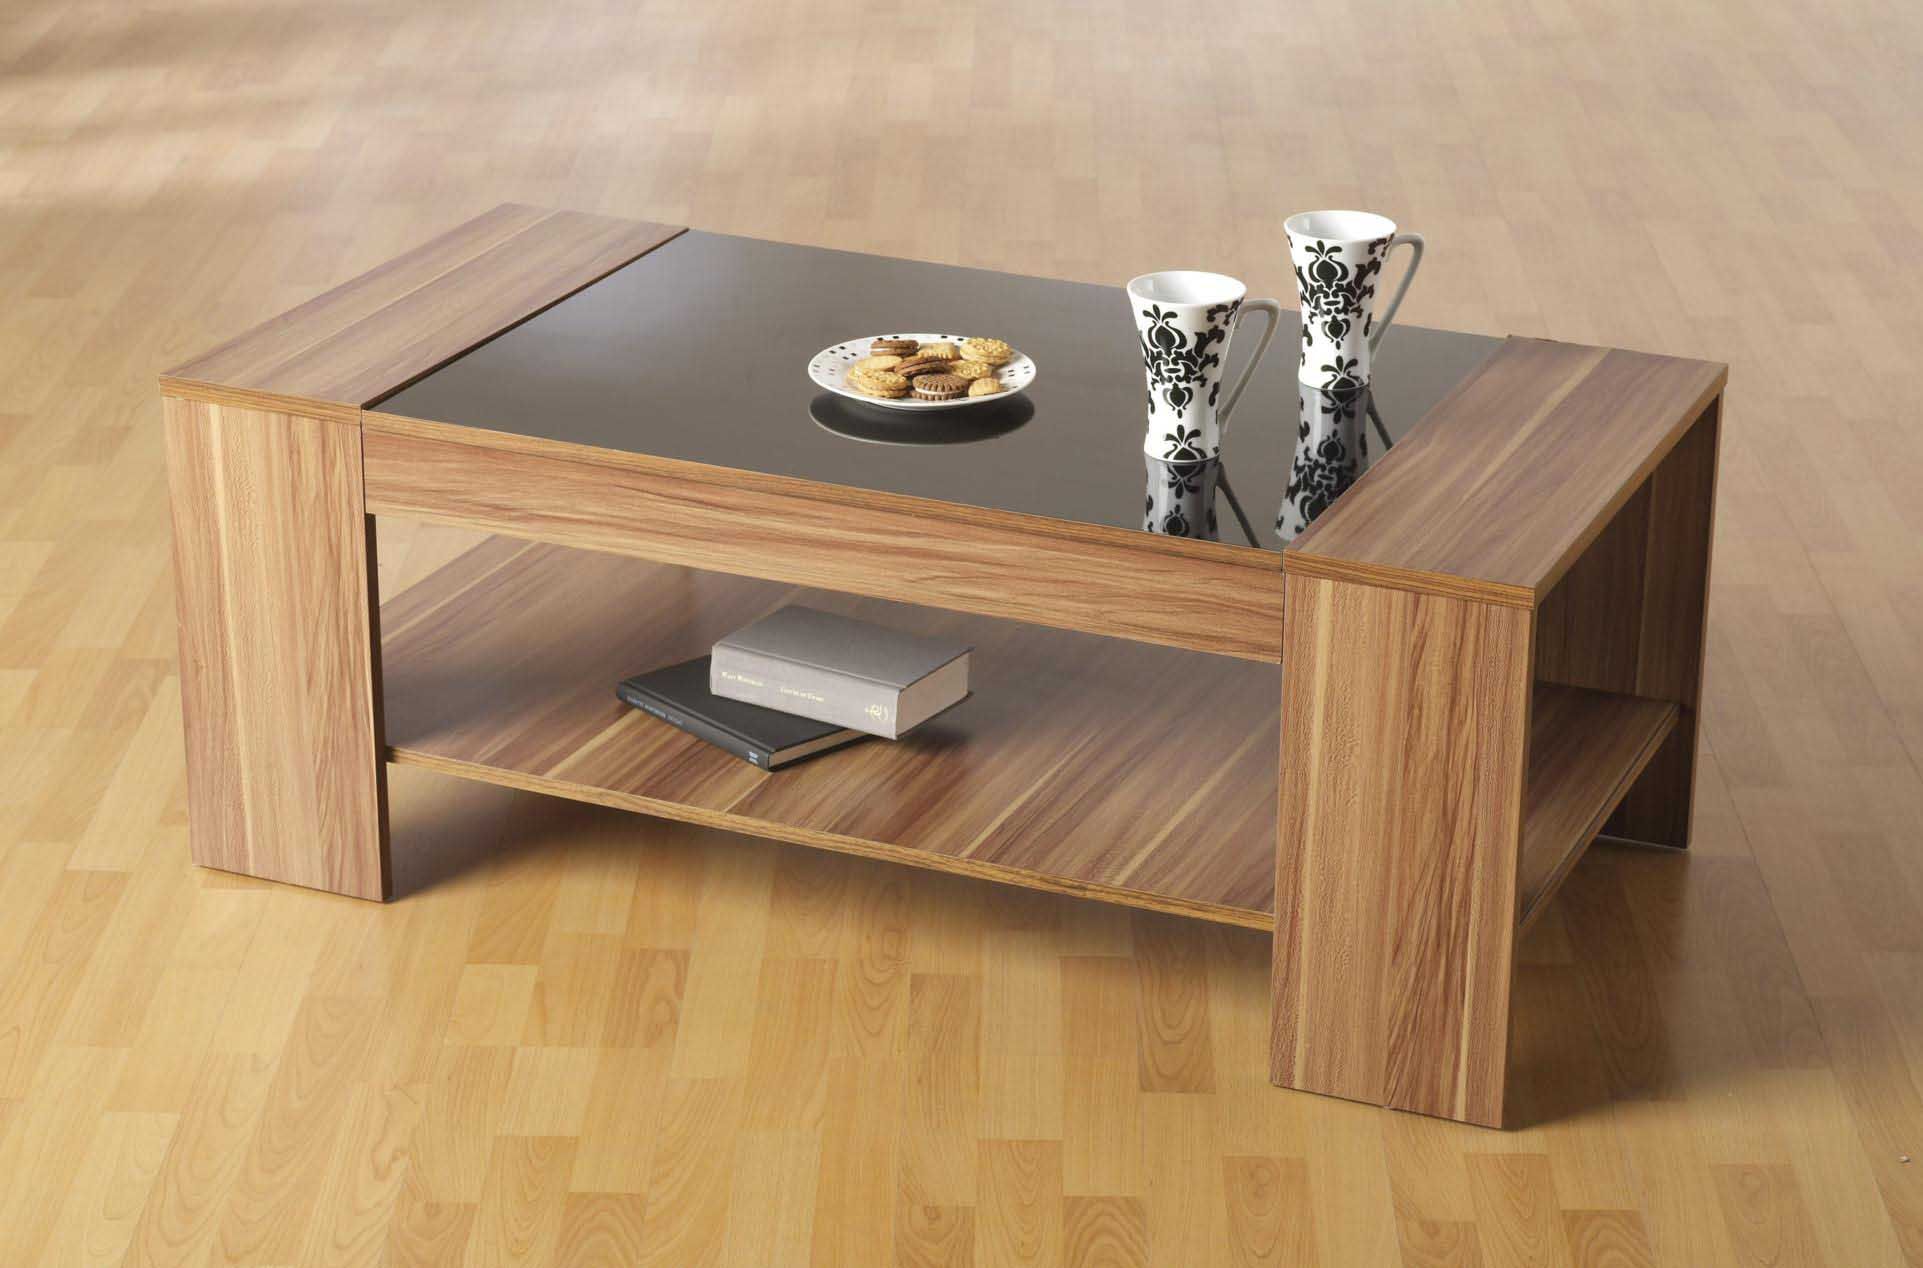 Coffee Table Wood And Glass Eton Solid Oak Living Room Lounge Furniture Storage Coffee Table With Drawers Legs Stained (View 4 of 10)